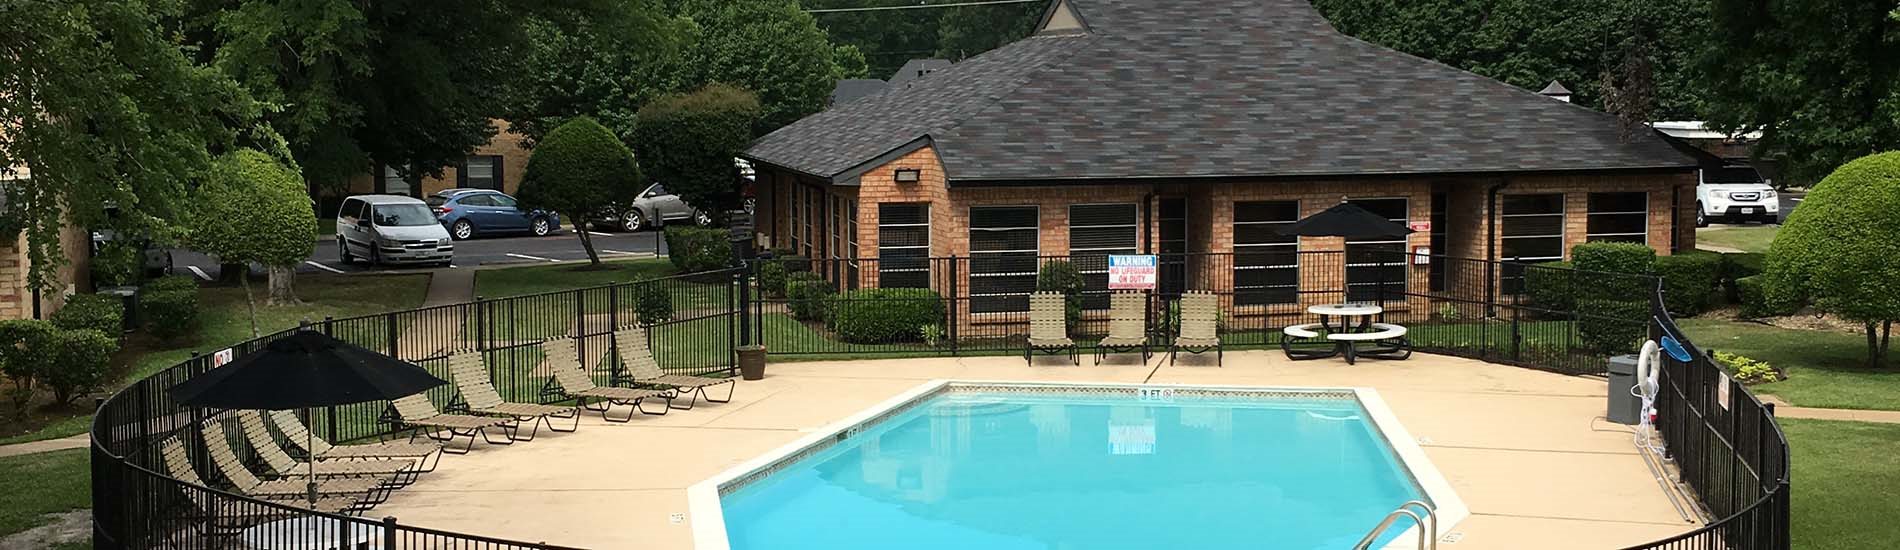 Pool with lounge chairs and apt buildings Longview, Texas Apartments For Rent l Saddle Book